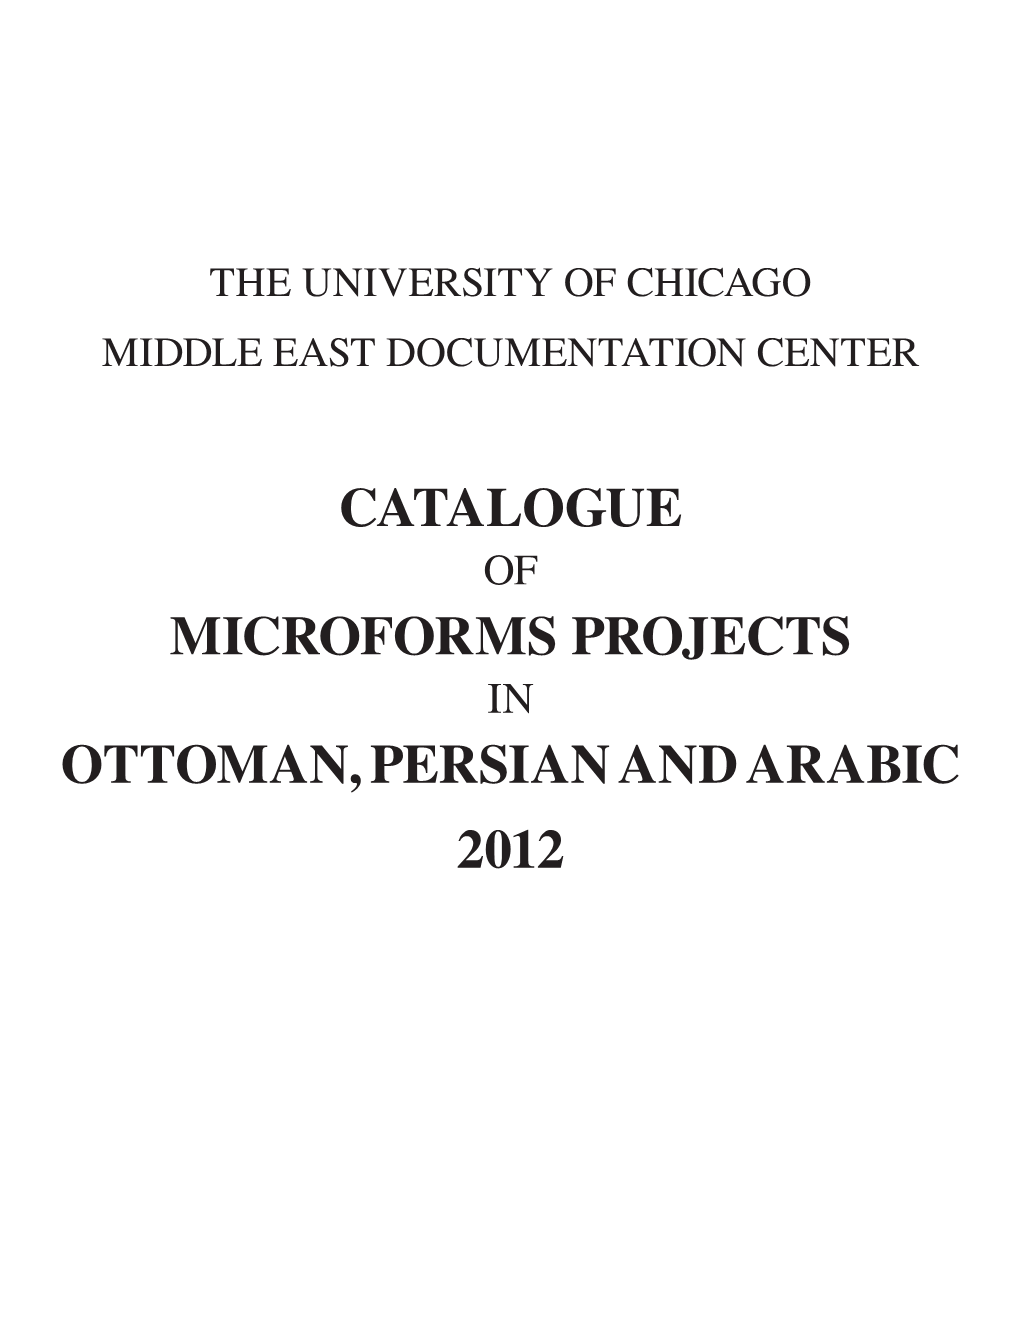 MEDOC Catalogue of Microforms Projects in Ottoman, Persian And